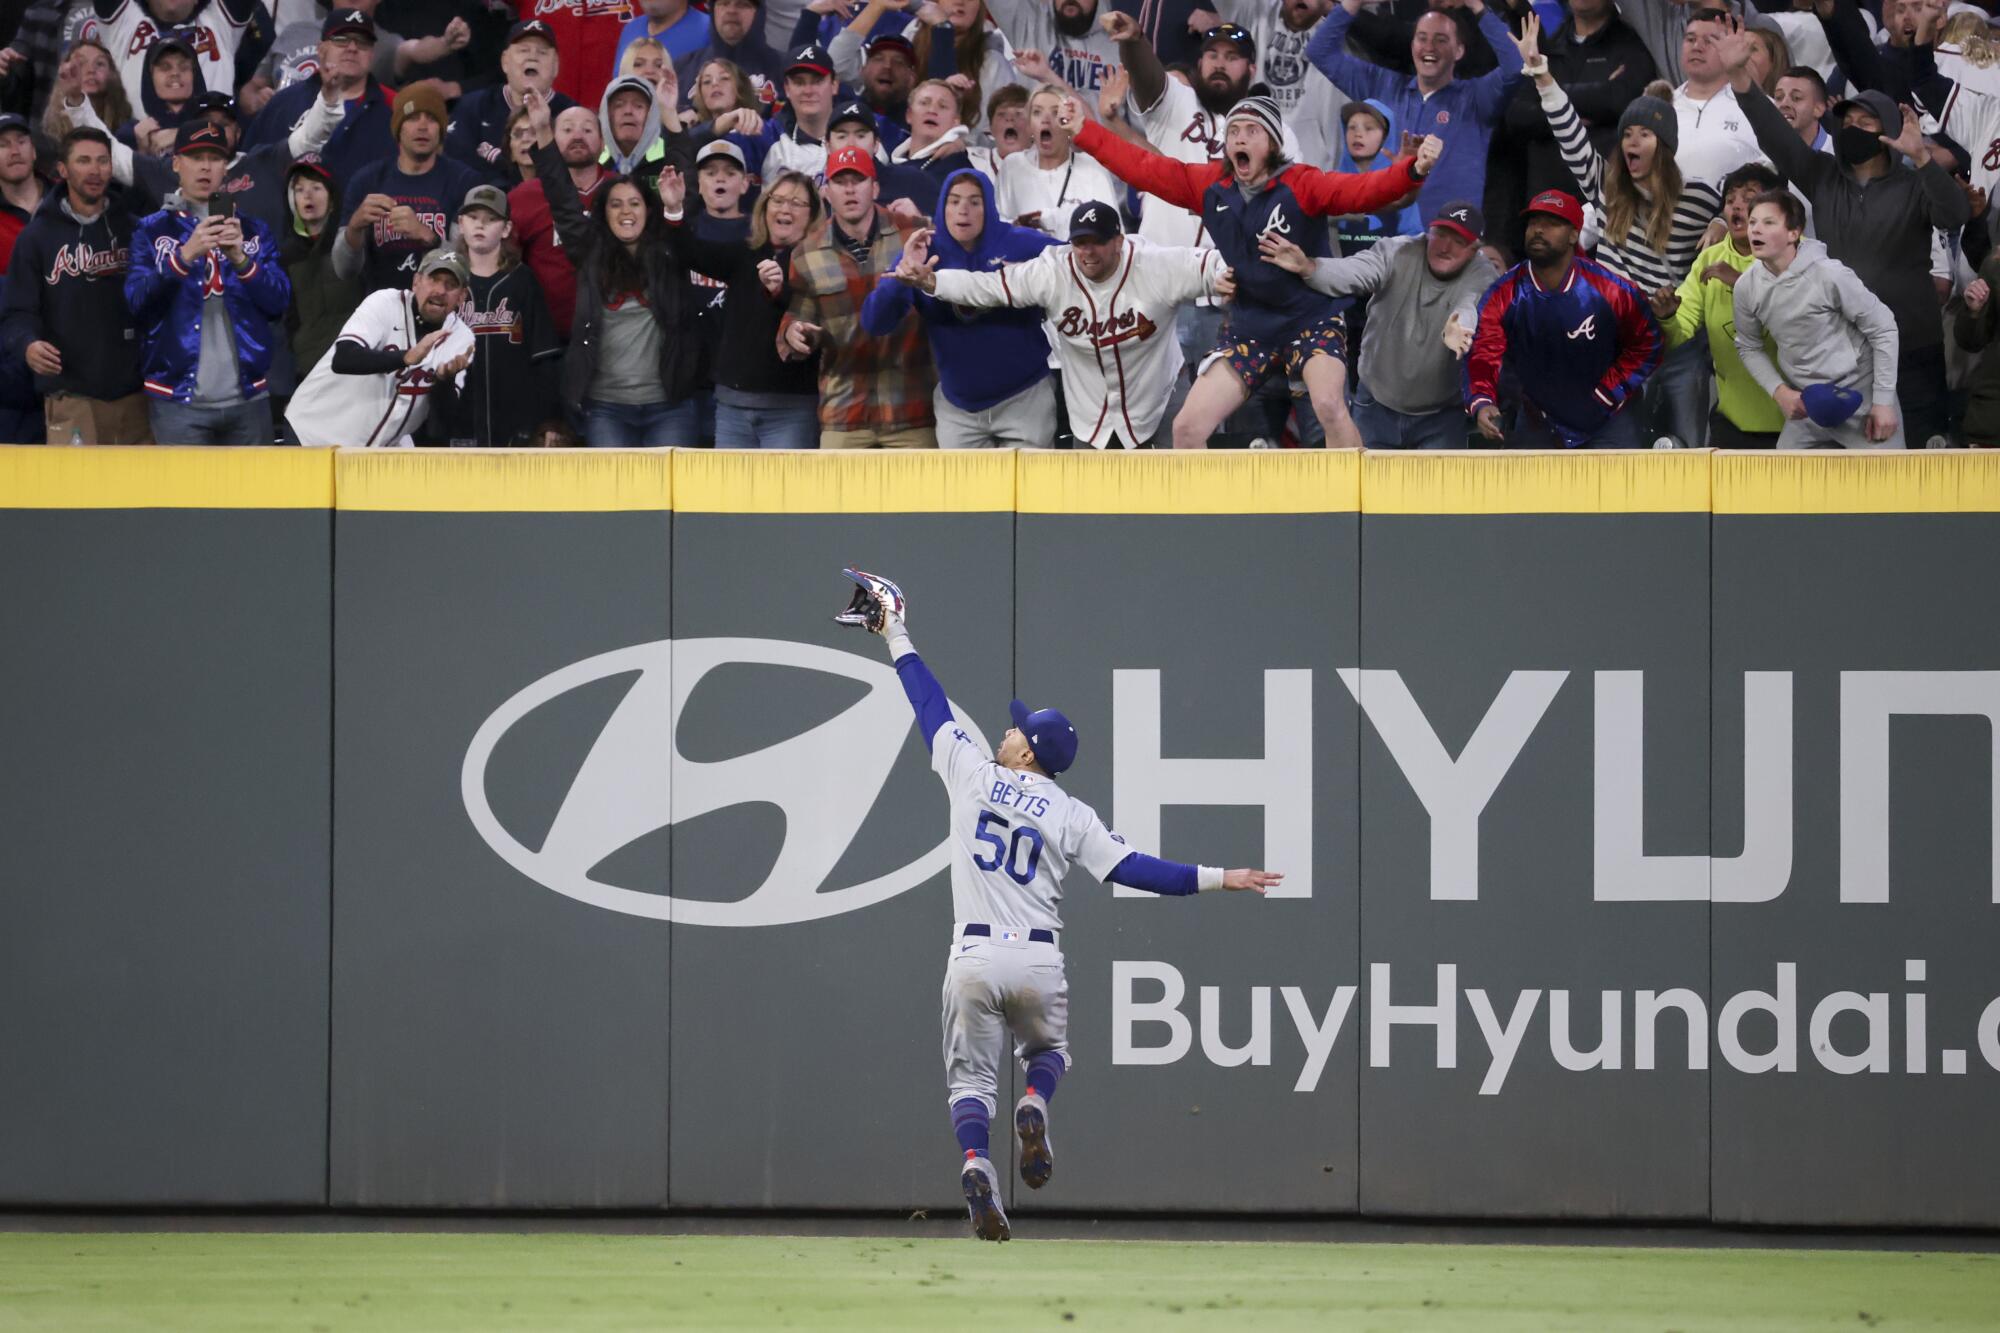 The crowd screams as Los Angeles Dodgers right fielder Mookie Betts is unable to make a play